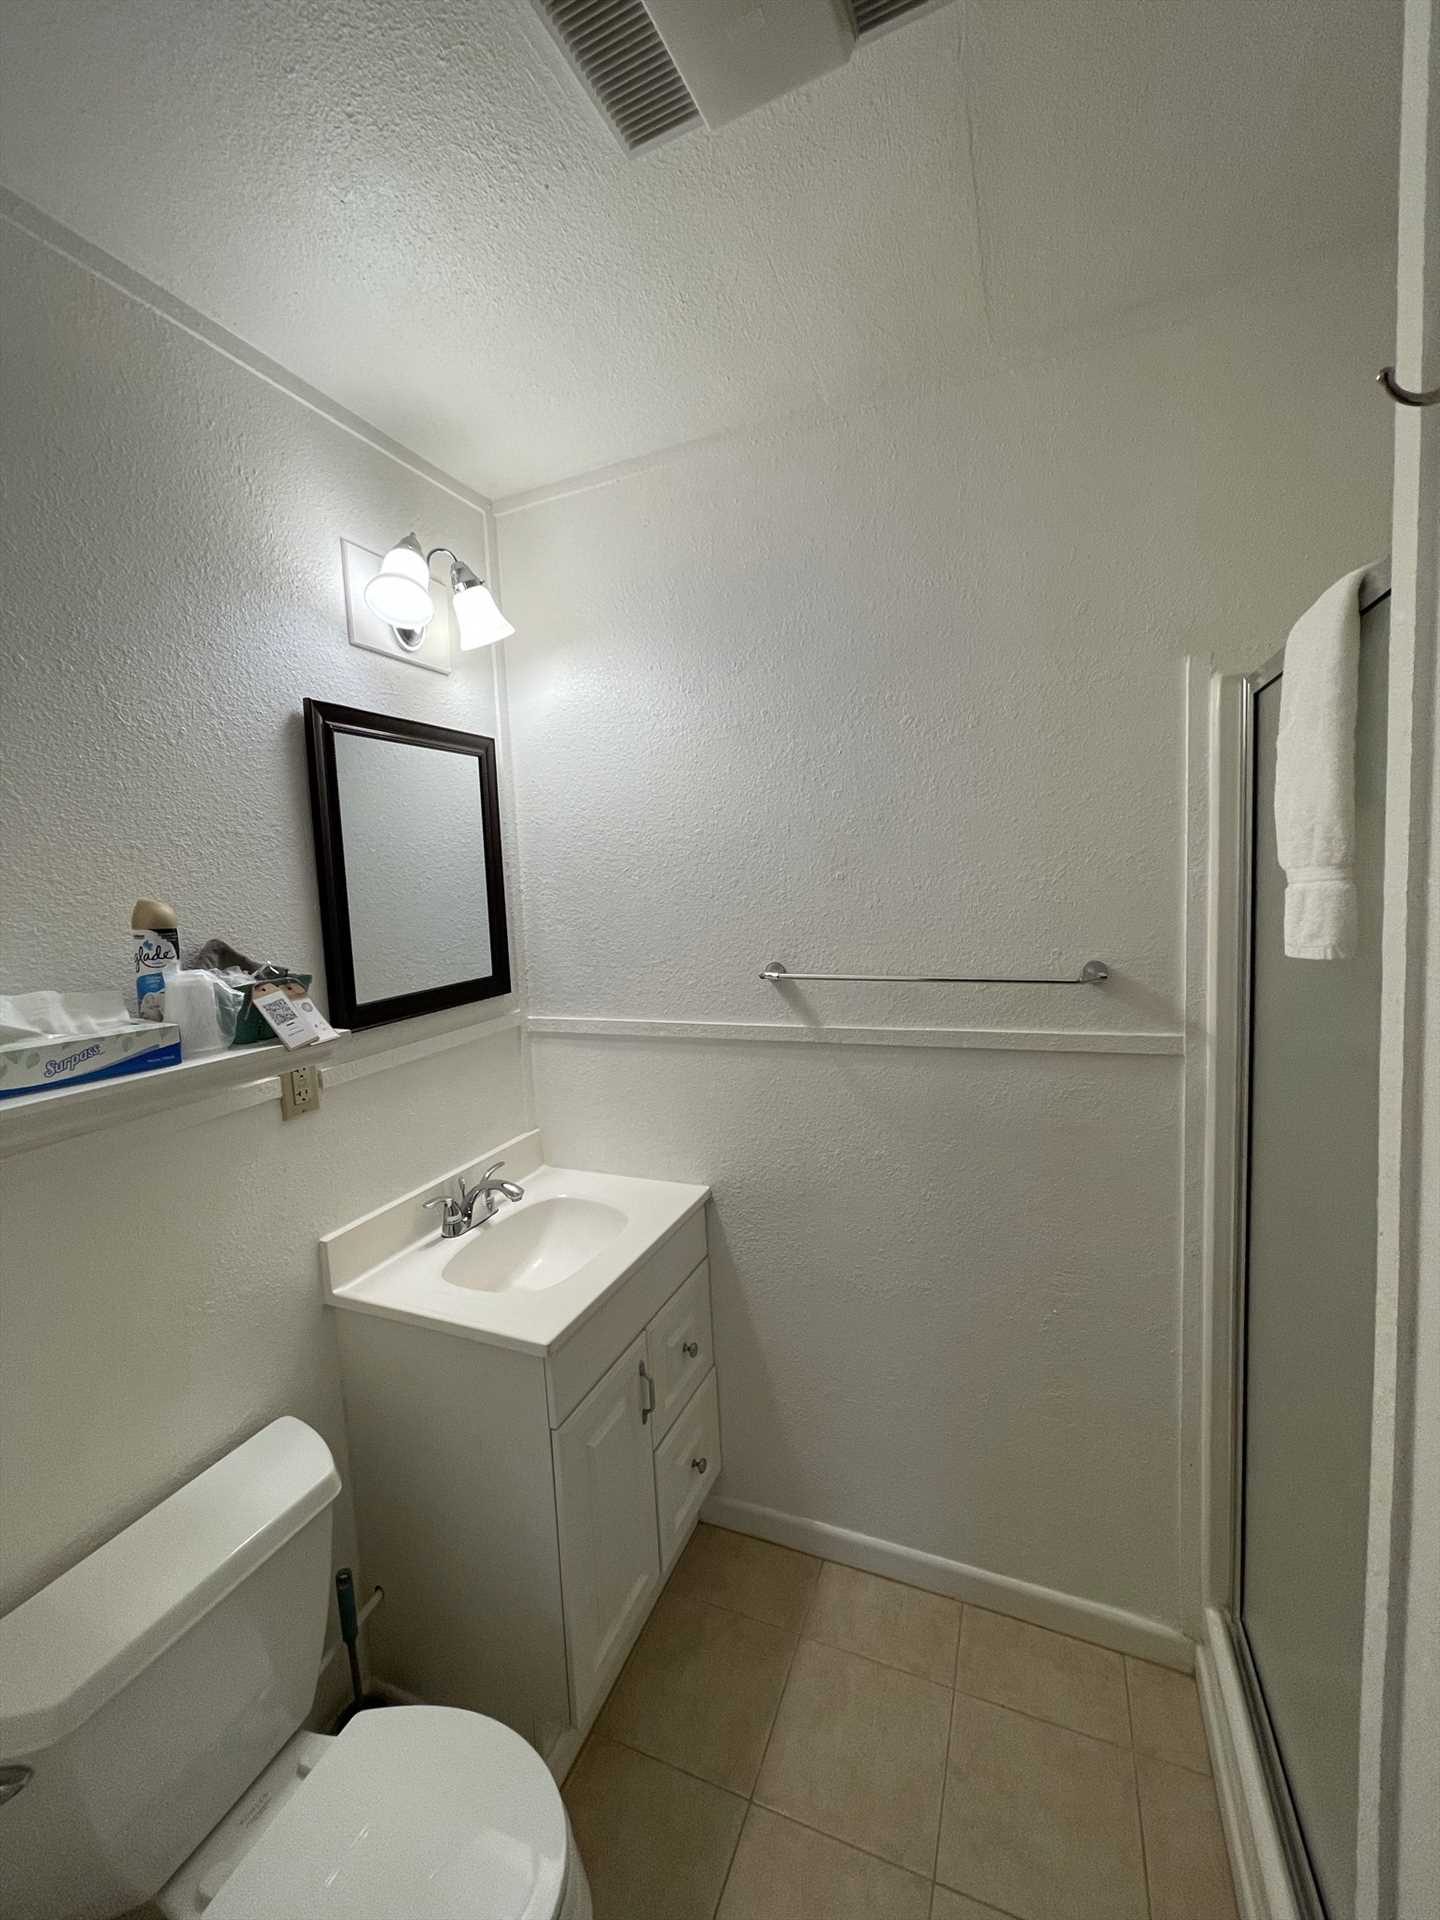                                                 Fresh linens are provided in the spotlessly-clean full bath, which includes a shower stall for cleanup ease.